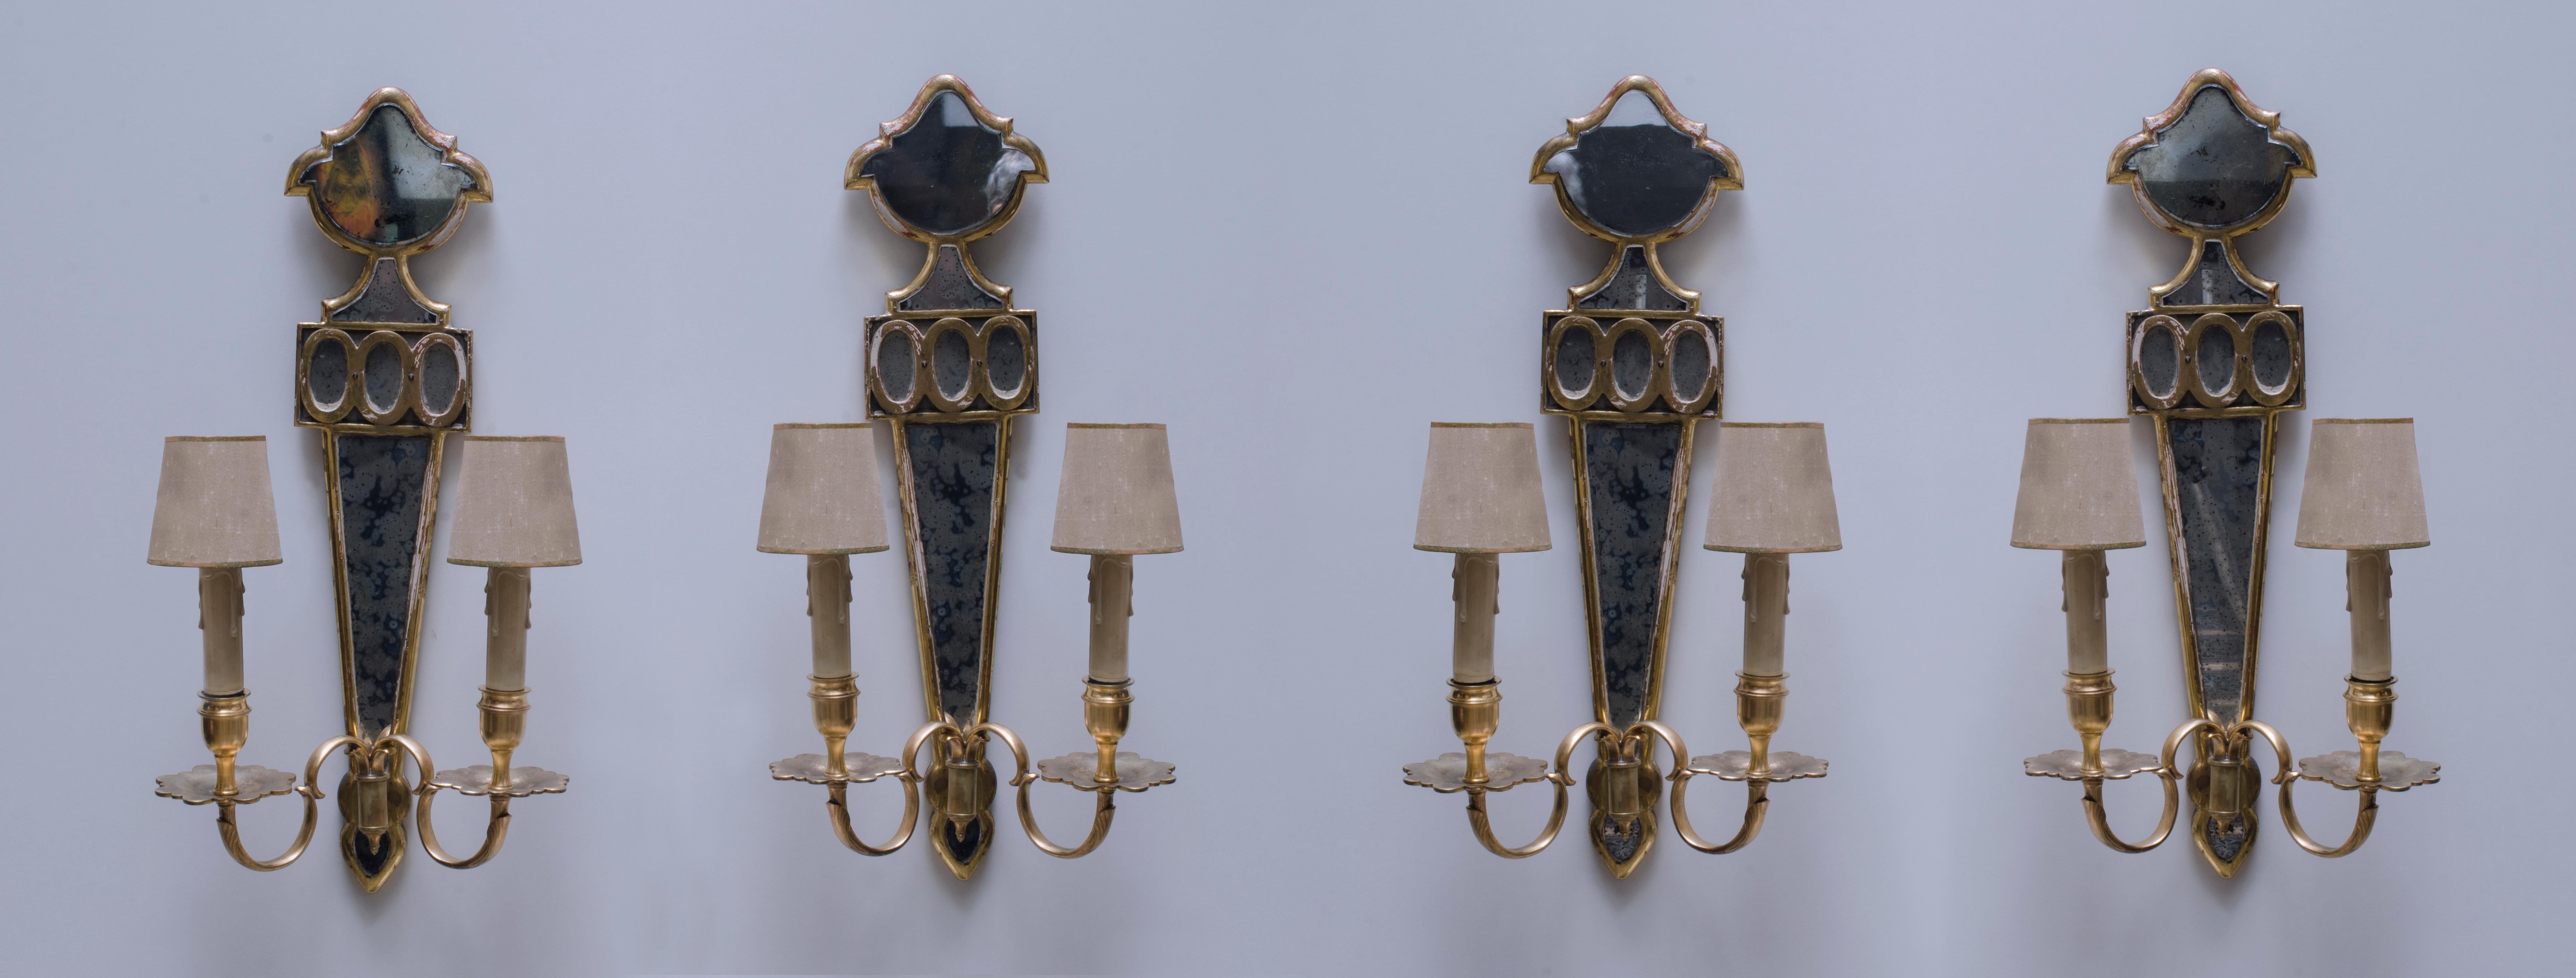 Wall sconces made by Maison Jansen. Made with a wooden structure with gilt leaf, Venetian mirror and bronze arms with wooden veins.

France, CIRCA 1940.